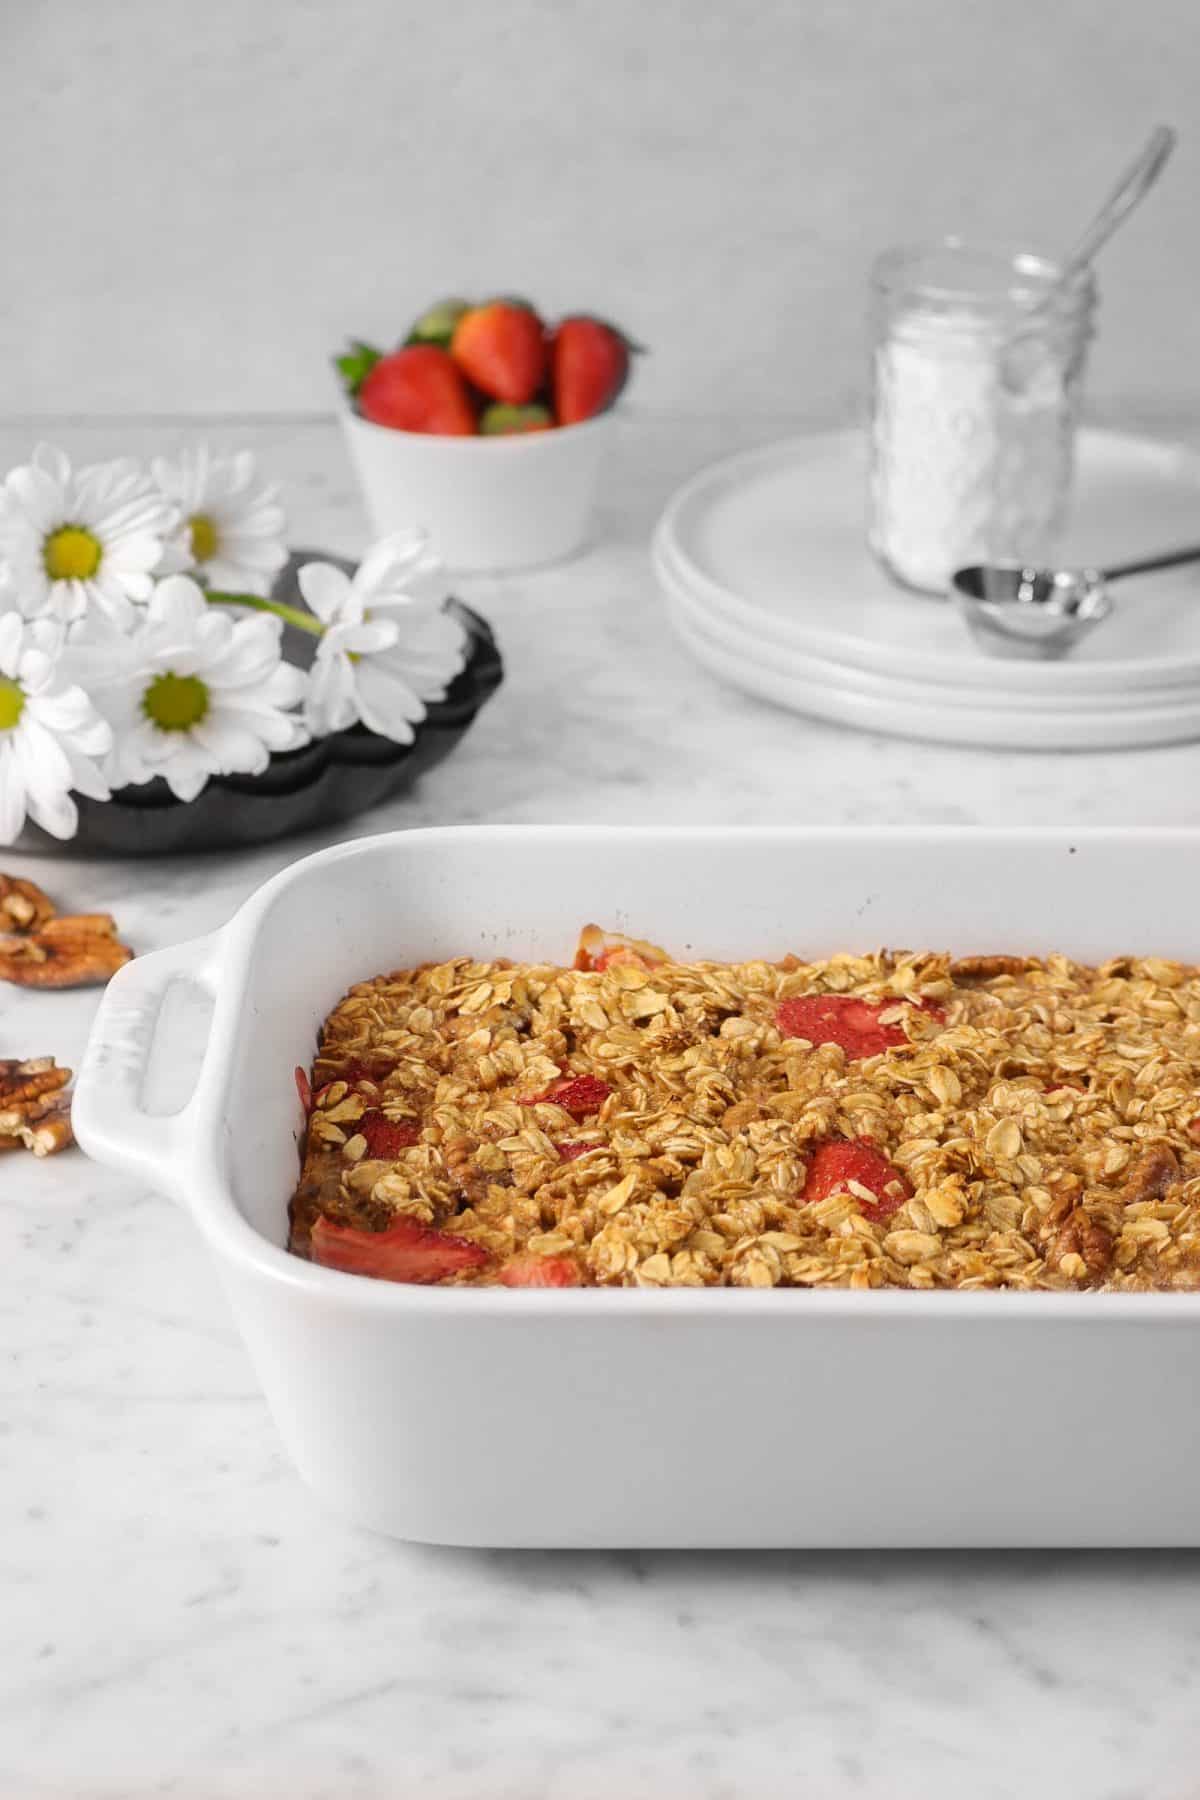 strawberry oatmeal bake in a casserole dish with flowers, strawberries and plates in the background